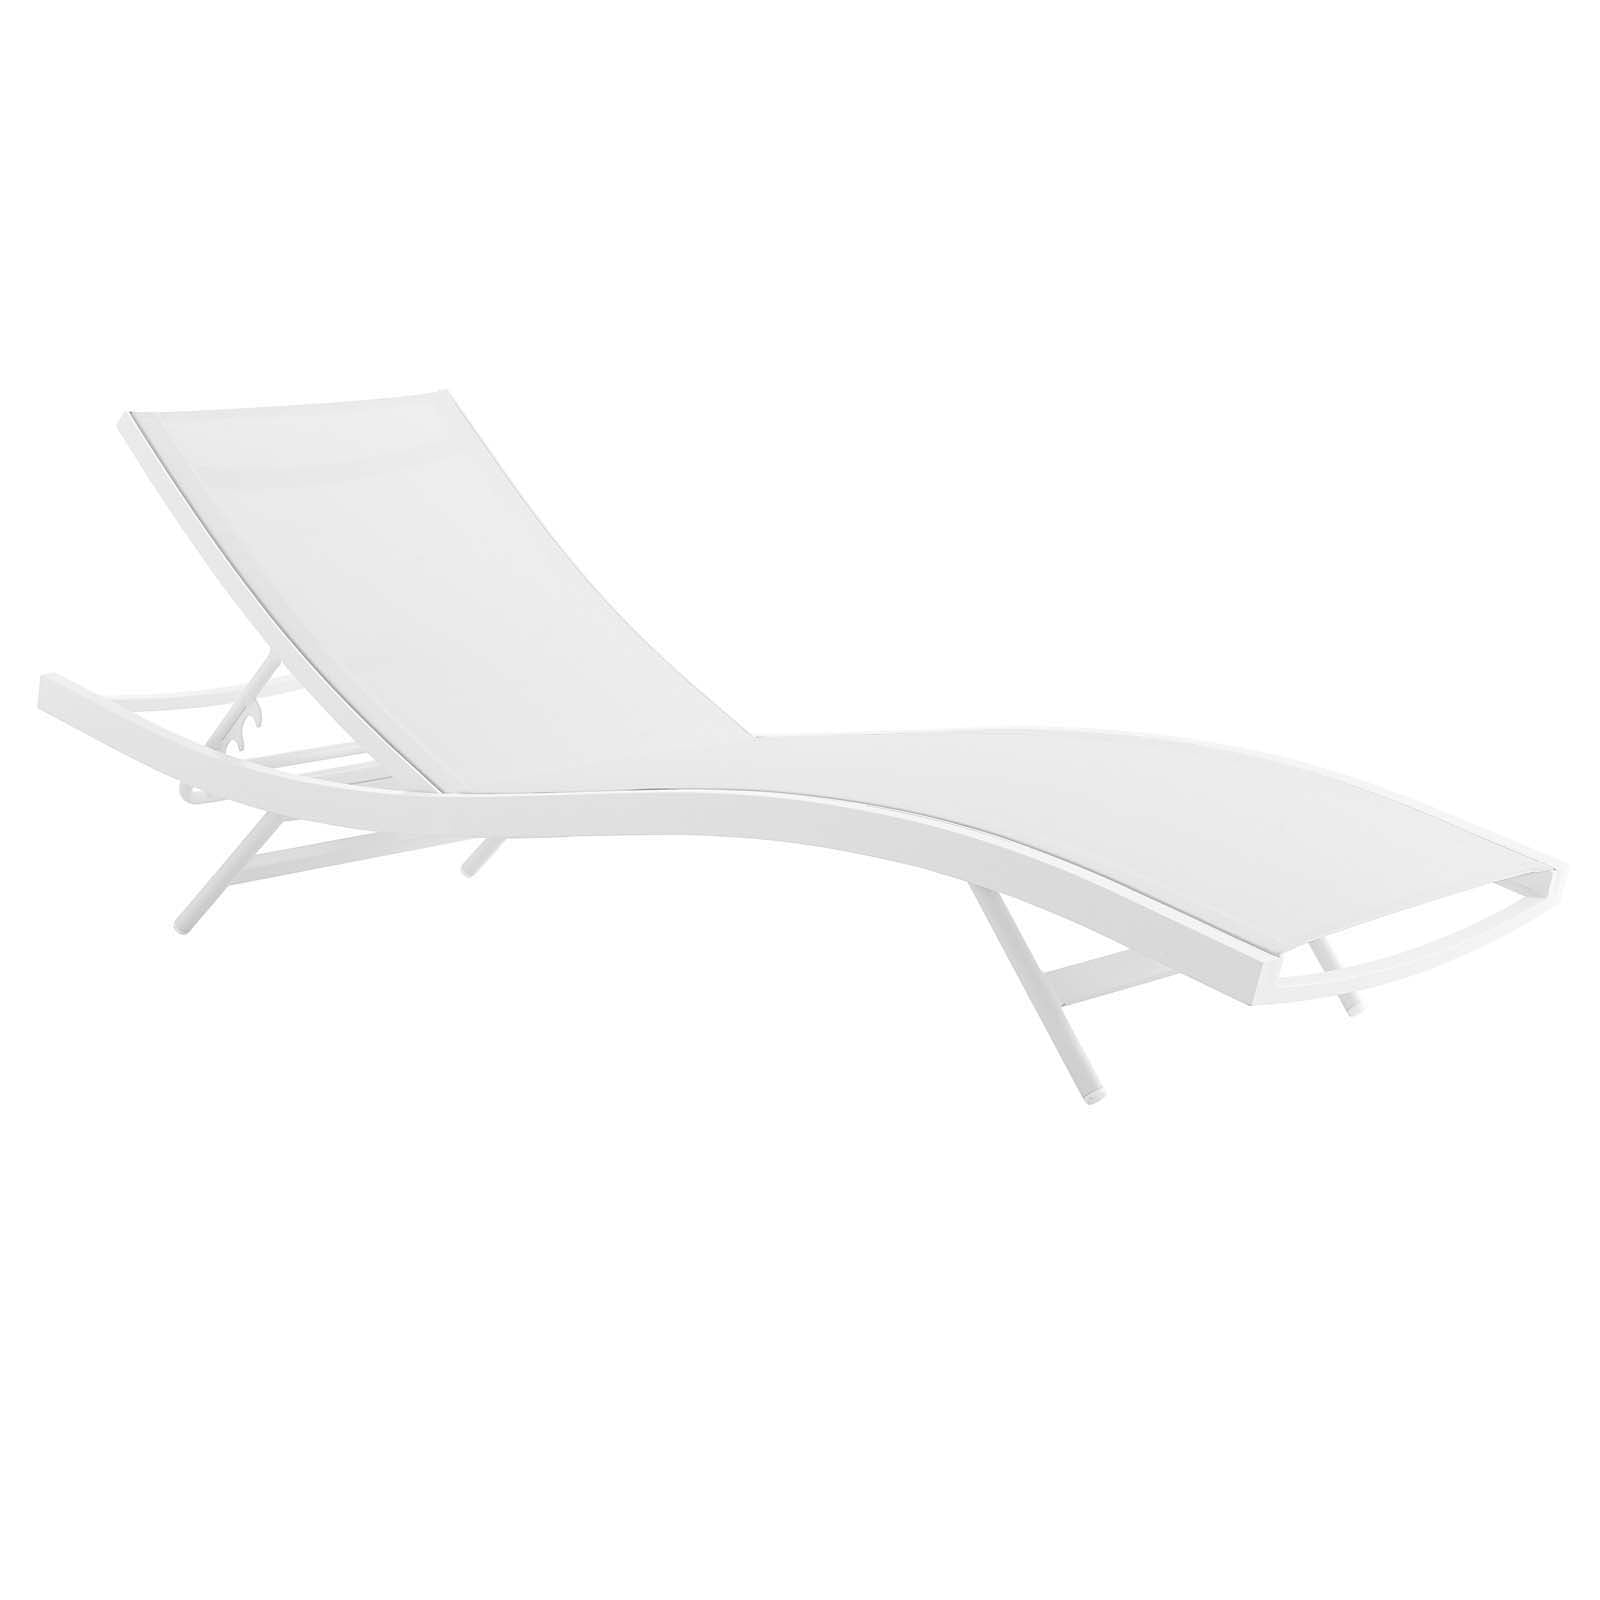 Modway Loungers - Glimpse Outdoor Patio Mesh Chaise Lounge Set of 4 White White